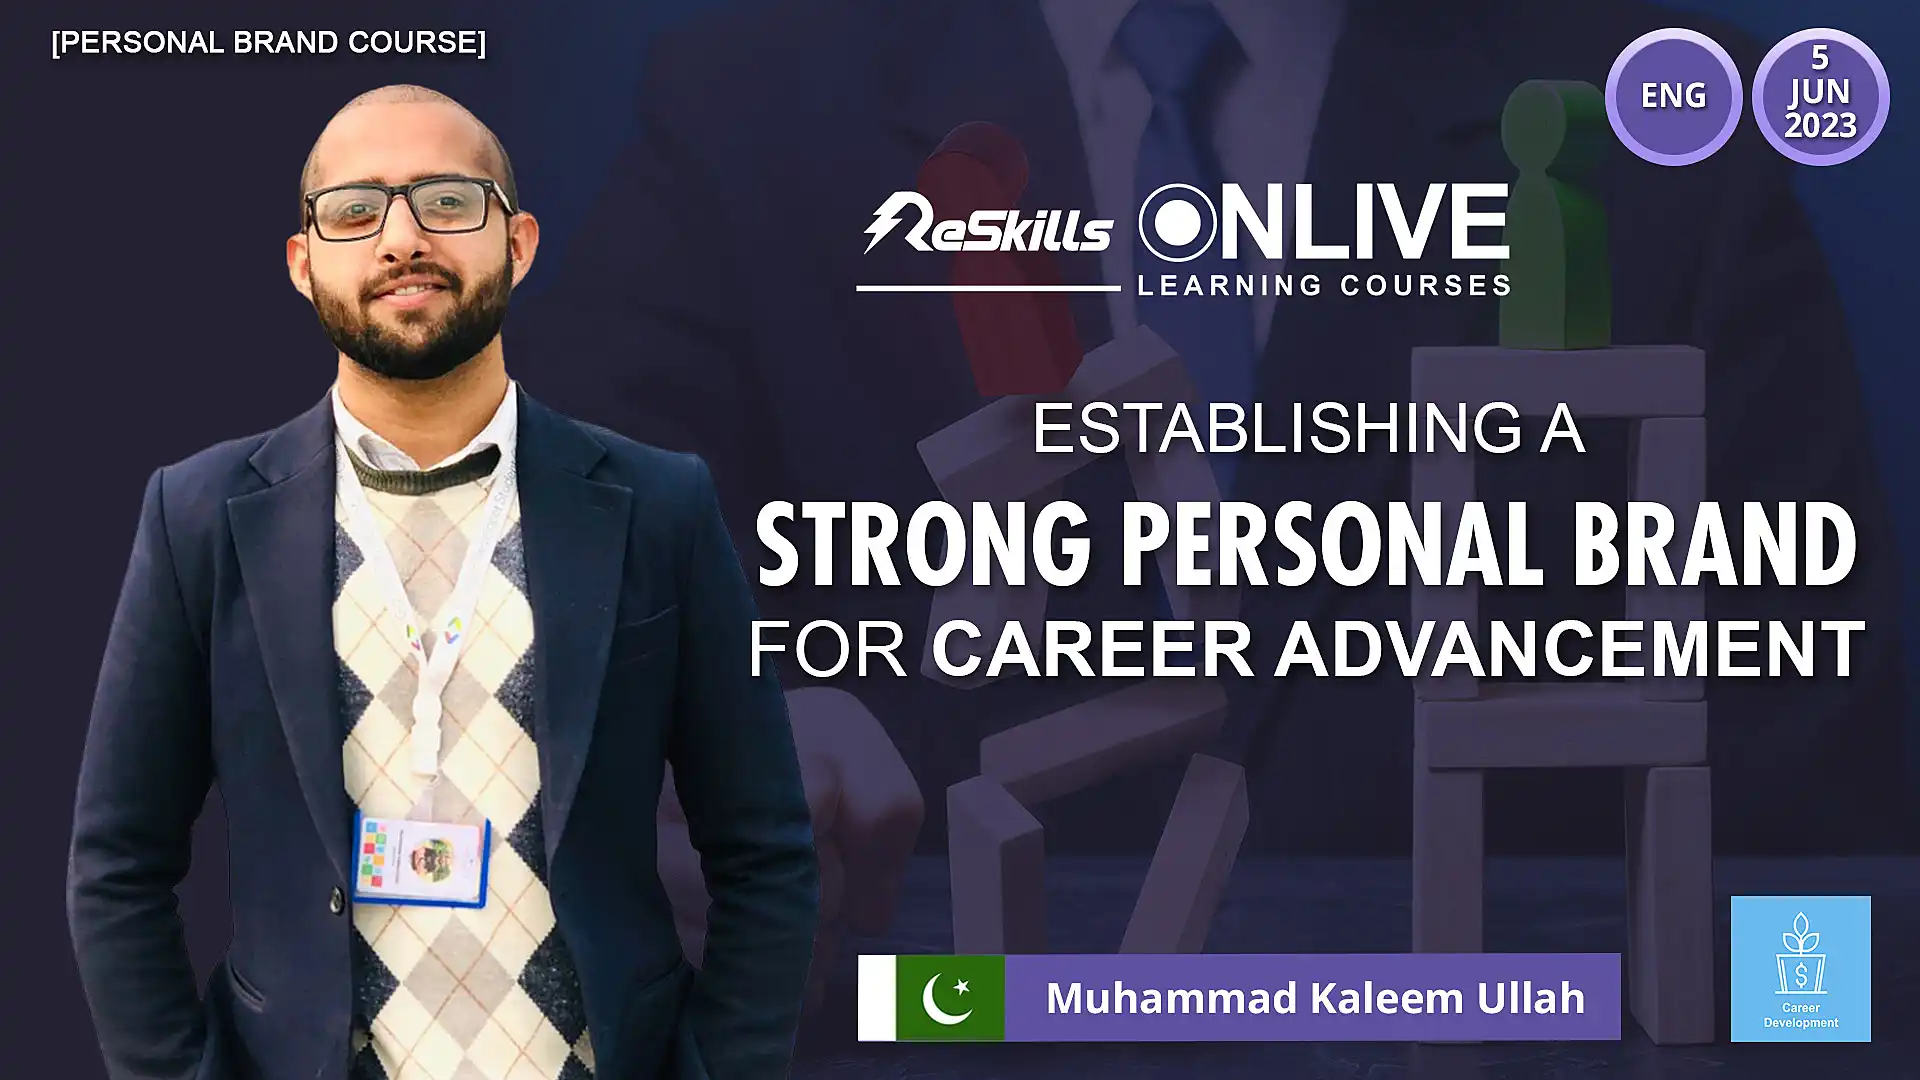 [Personal Brand Course] Establishing a Strong Personal Brand for Career Advancement - ReSkills